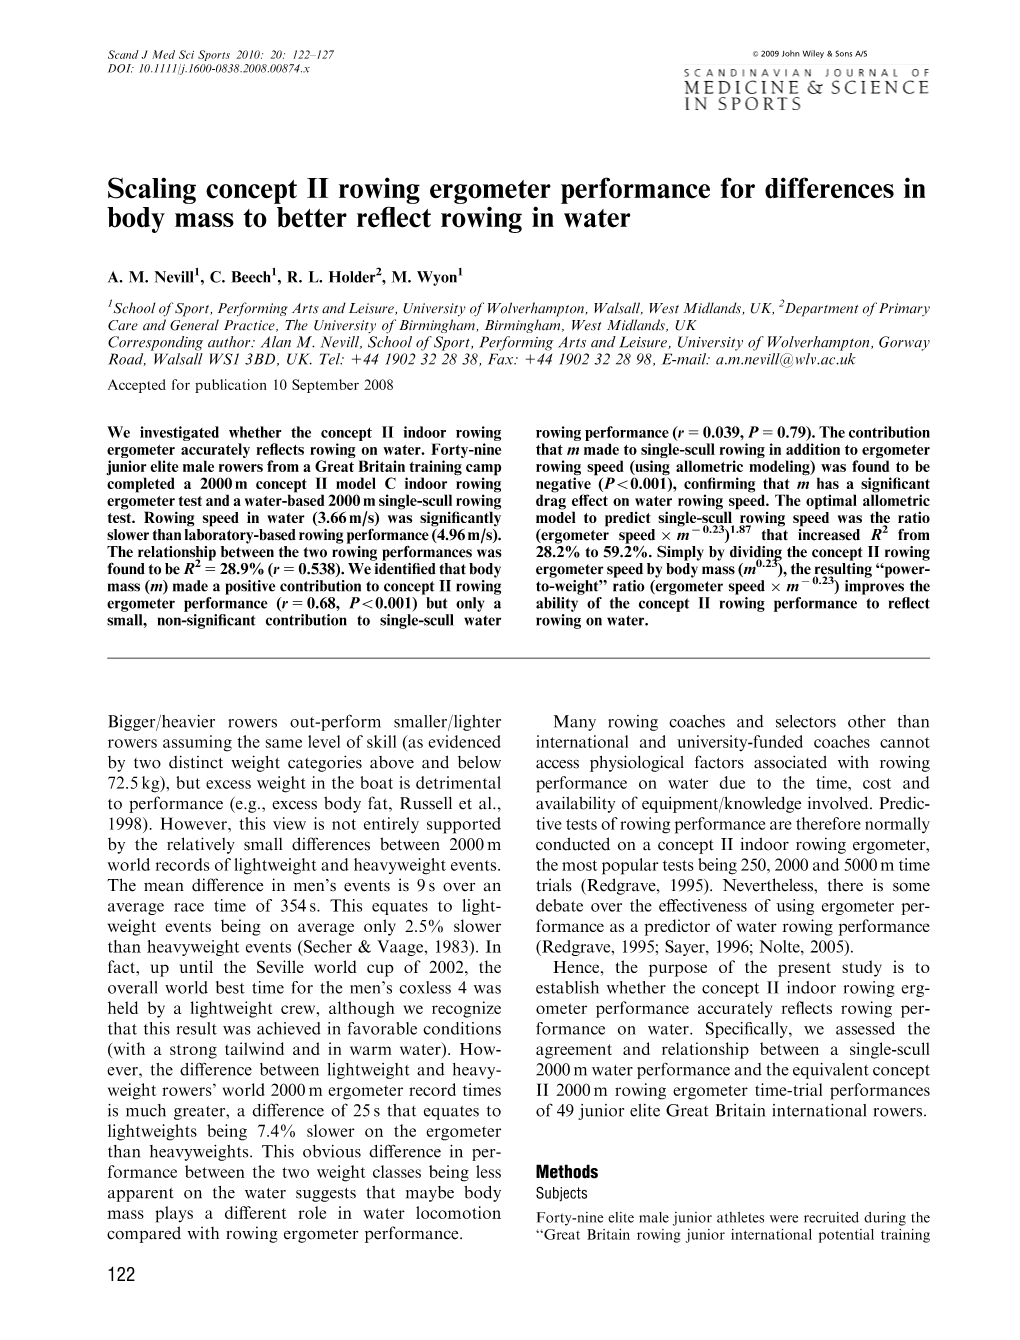 Scaling Concept II Rowing Ergometer Performance for Differences in Body Mass to Better Reﬂect Rowing in Water